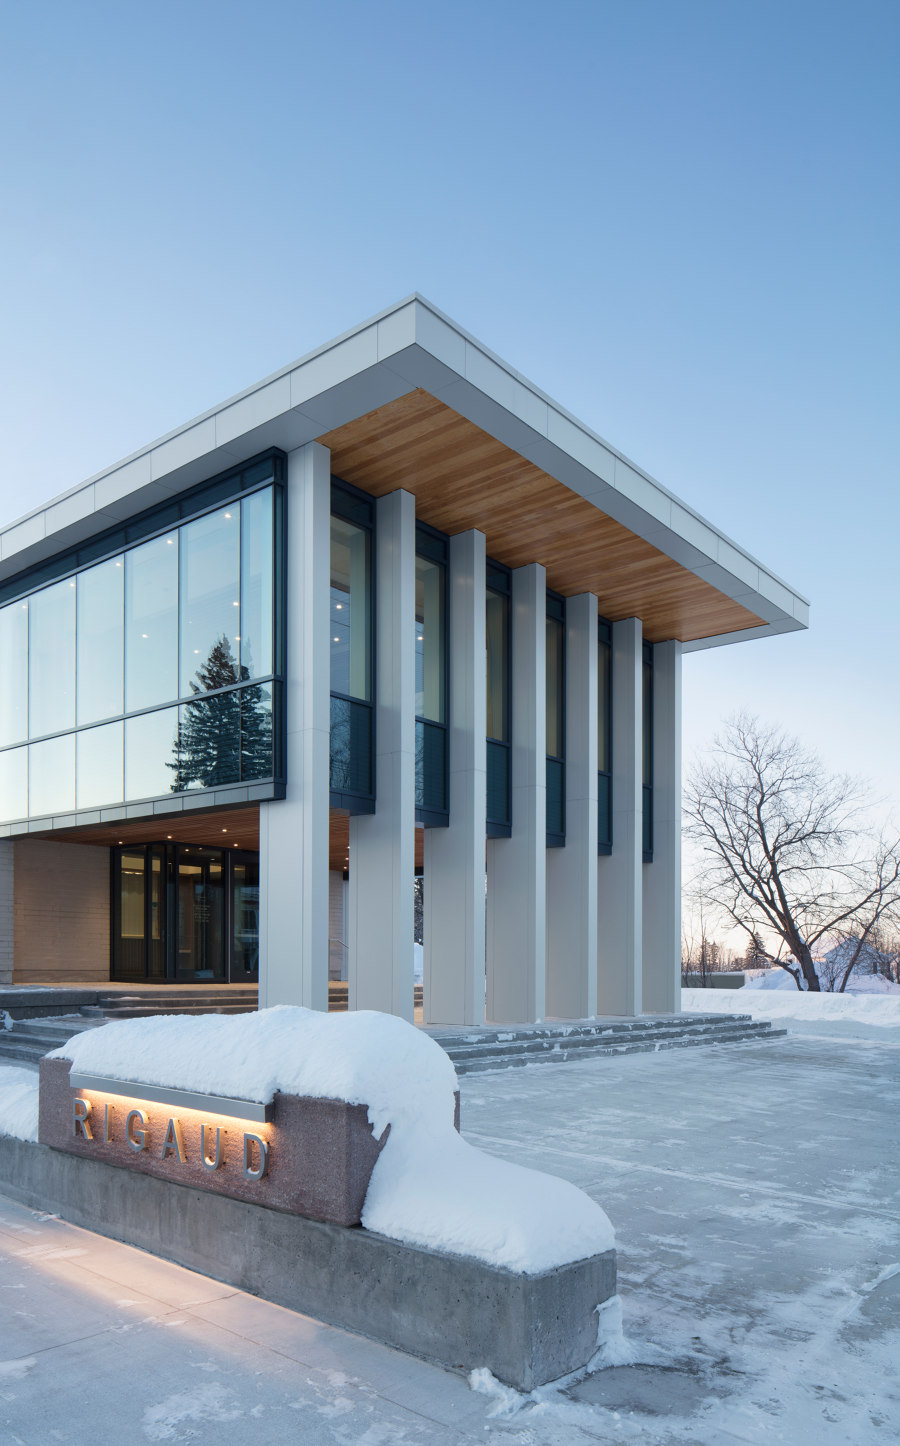 Rigaud City Hall by Affleck de la Riva architects | Administration buildings